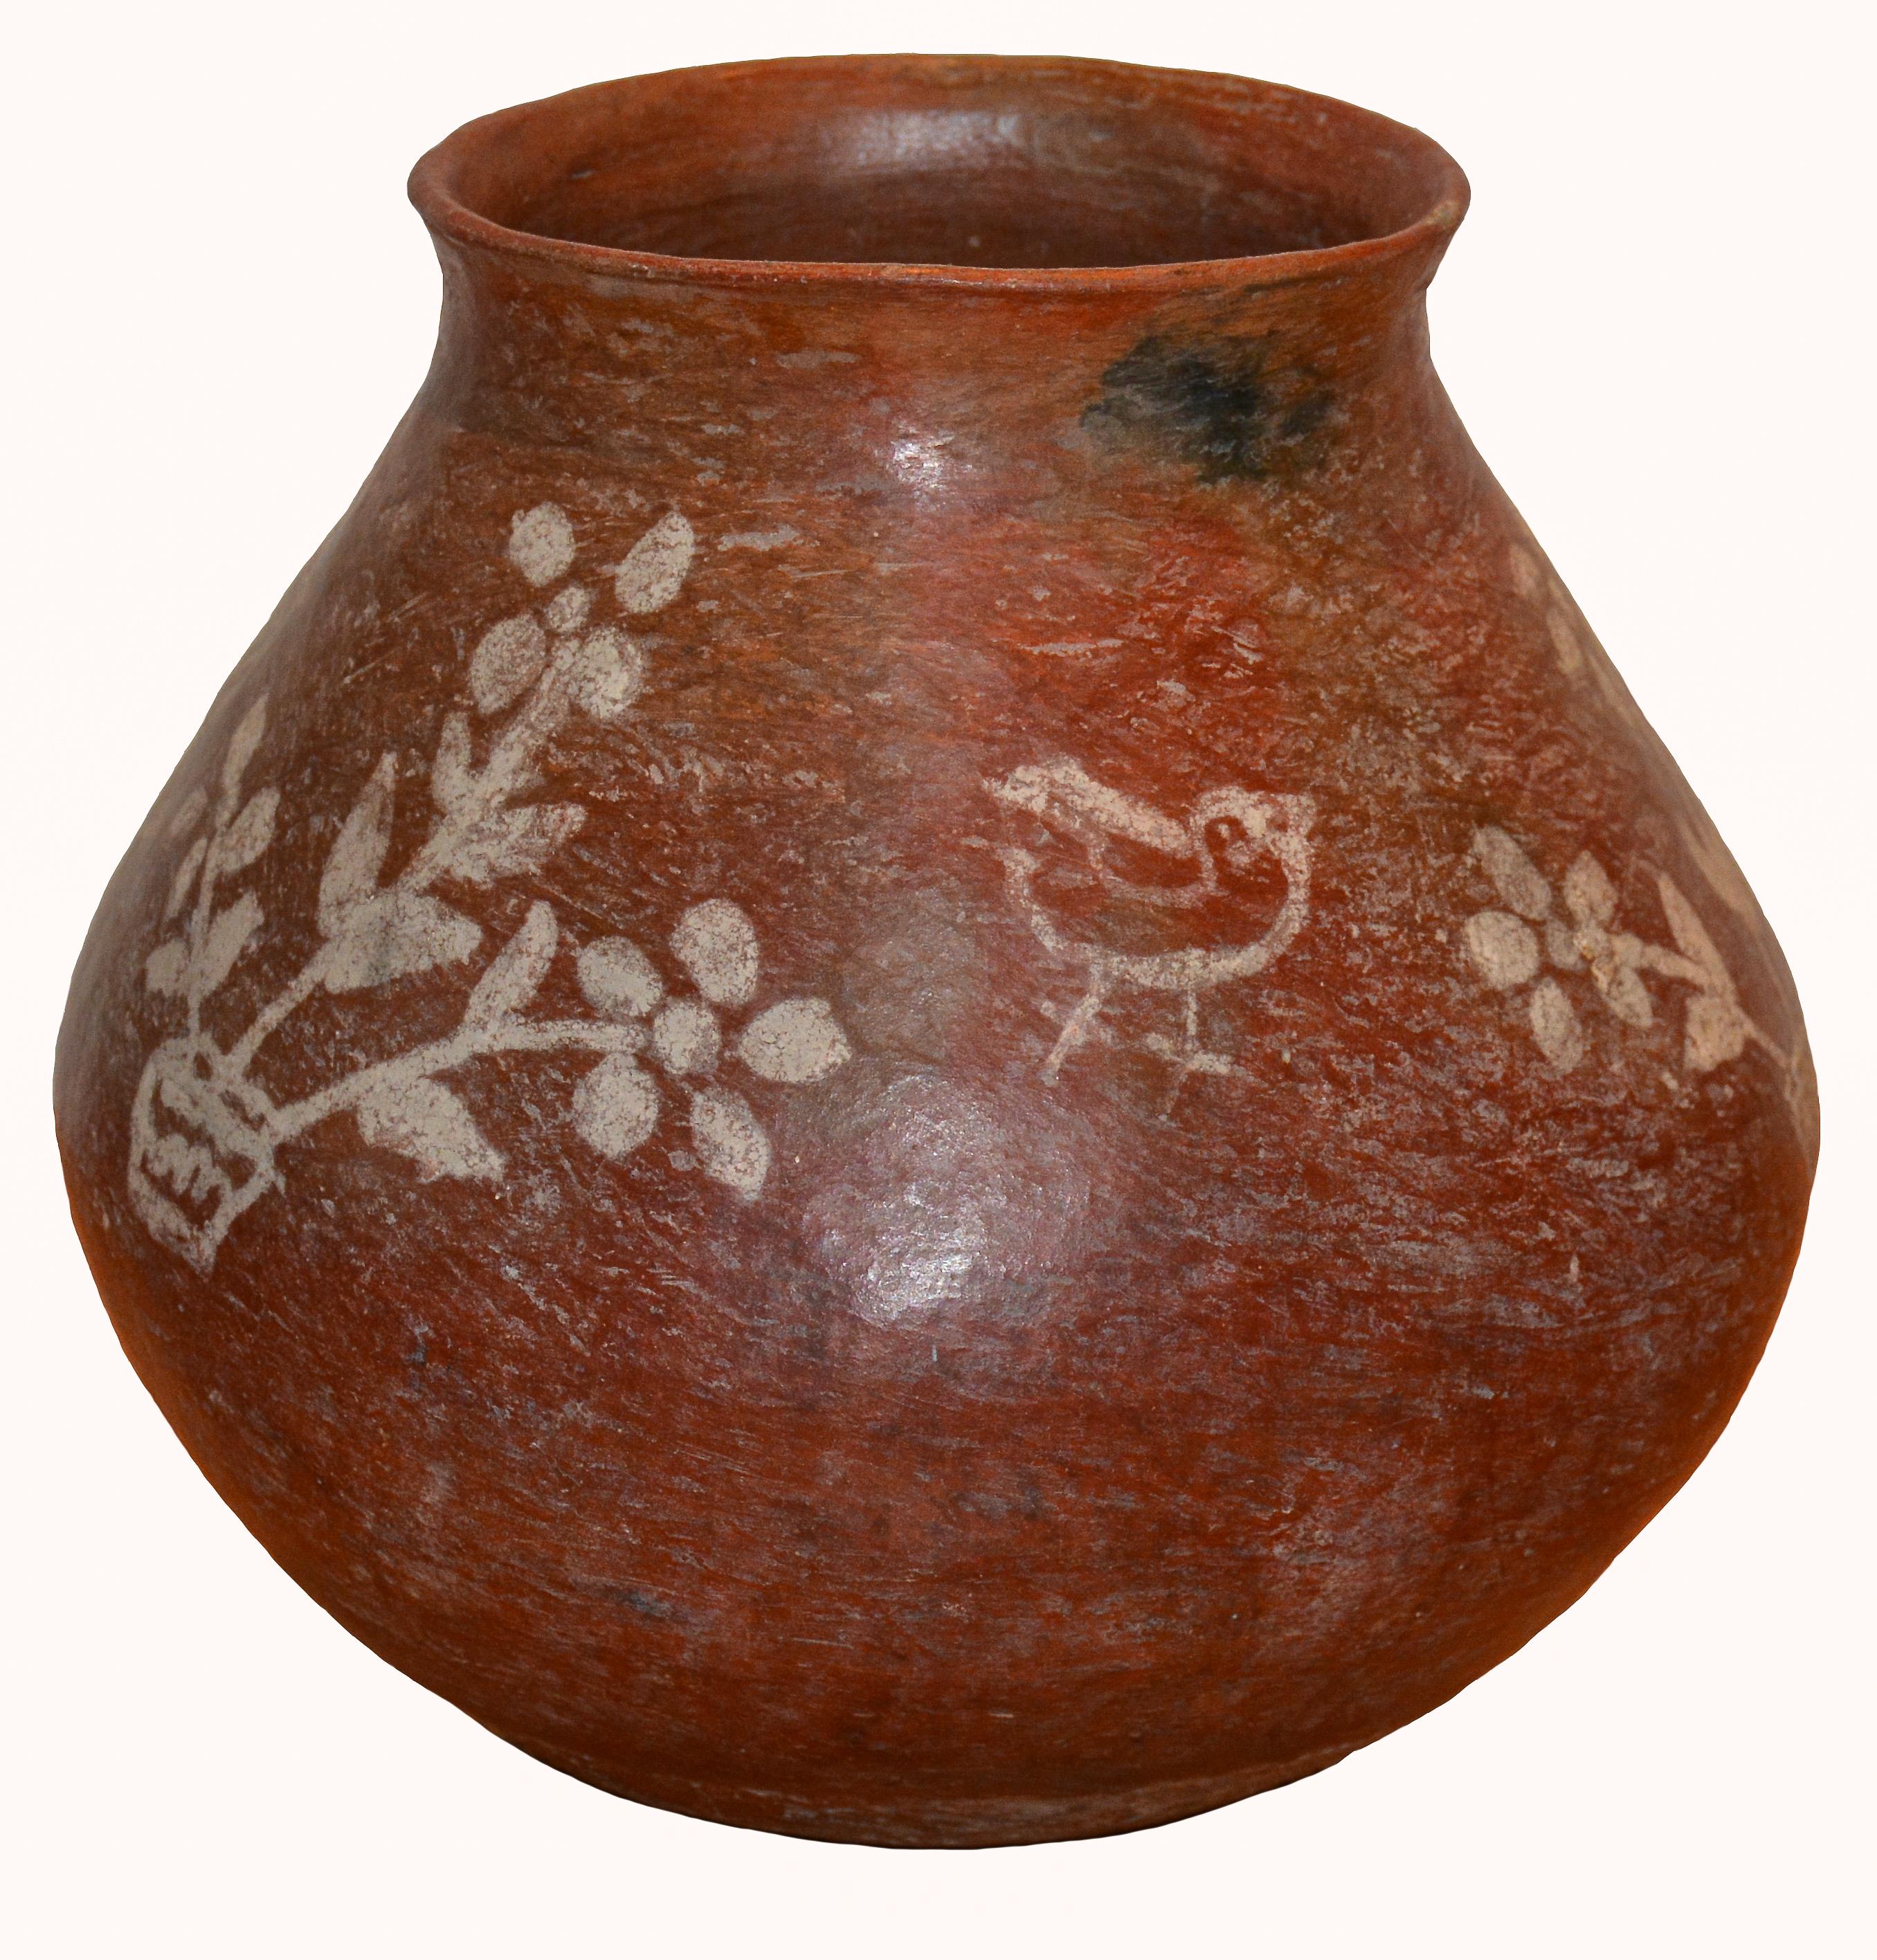 Tarahumara Indian Red Clay Water Pot decorated with Birds and Floral Designs
Sierra Tarahumara Mountains, Chihuahua, Mexico
1940s
Low fire clay.
12 inches Height x 11 inches in Diameter

An unusual 1940s vintage red clay Tarahumara Indian